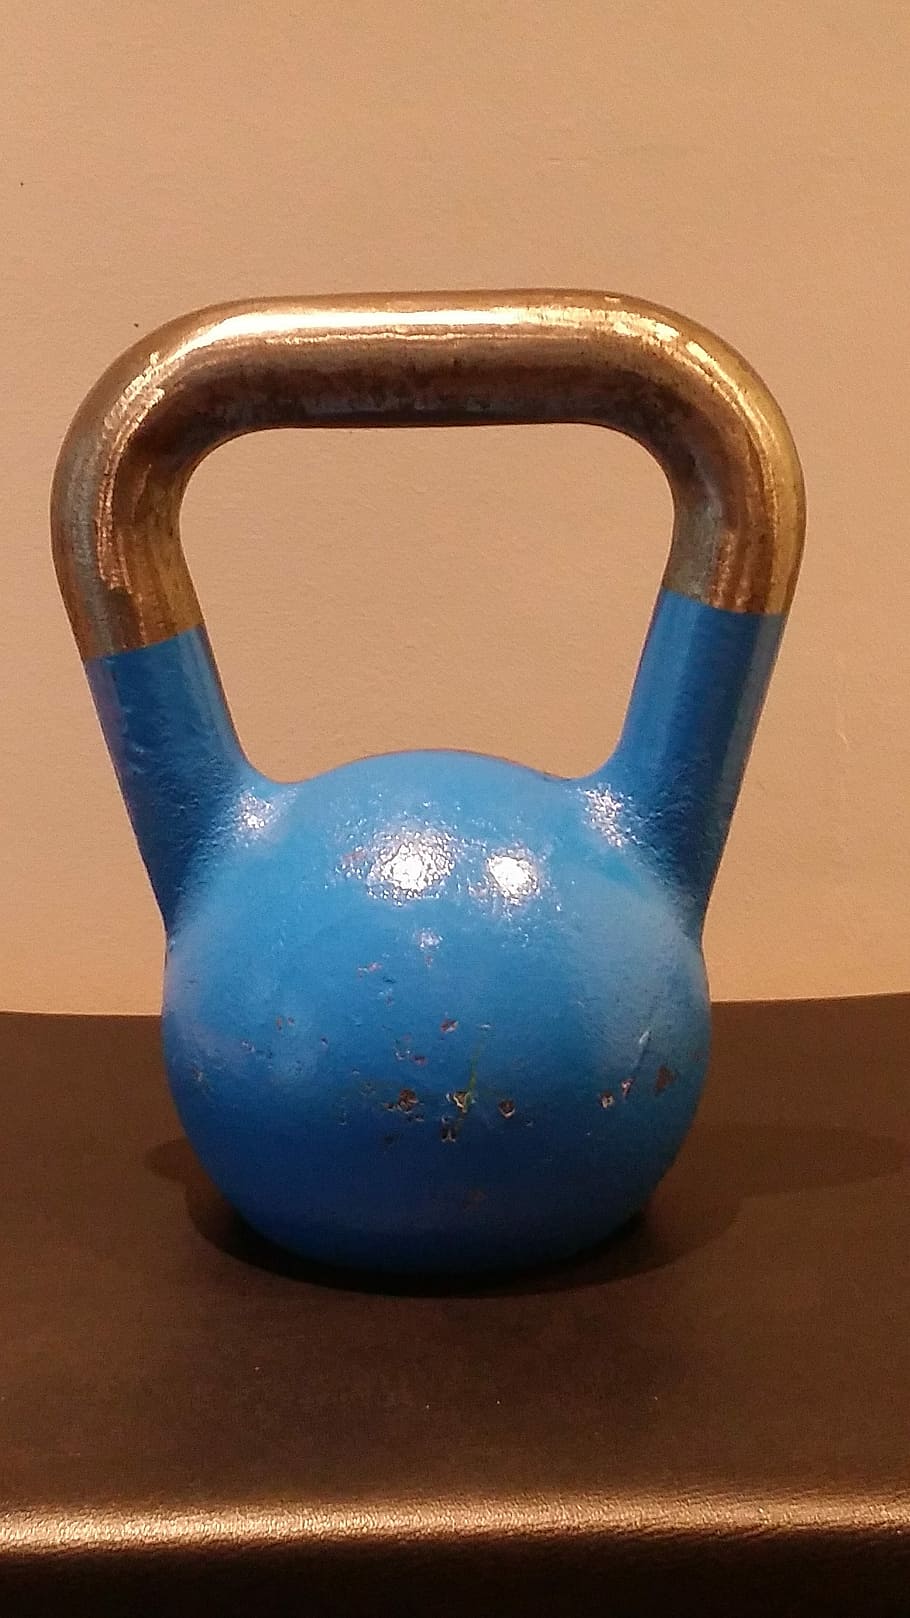 Kettlebell, blue, 12kg, studio shot, single object, colored background, indoors, still life, close-up, table